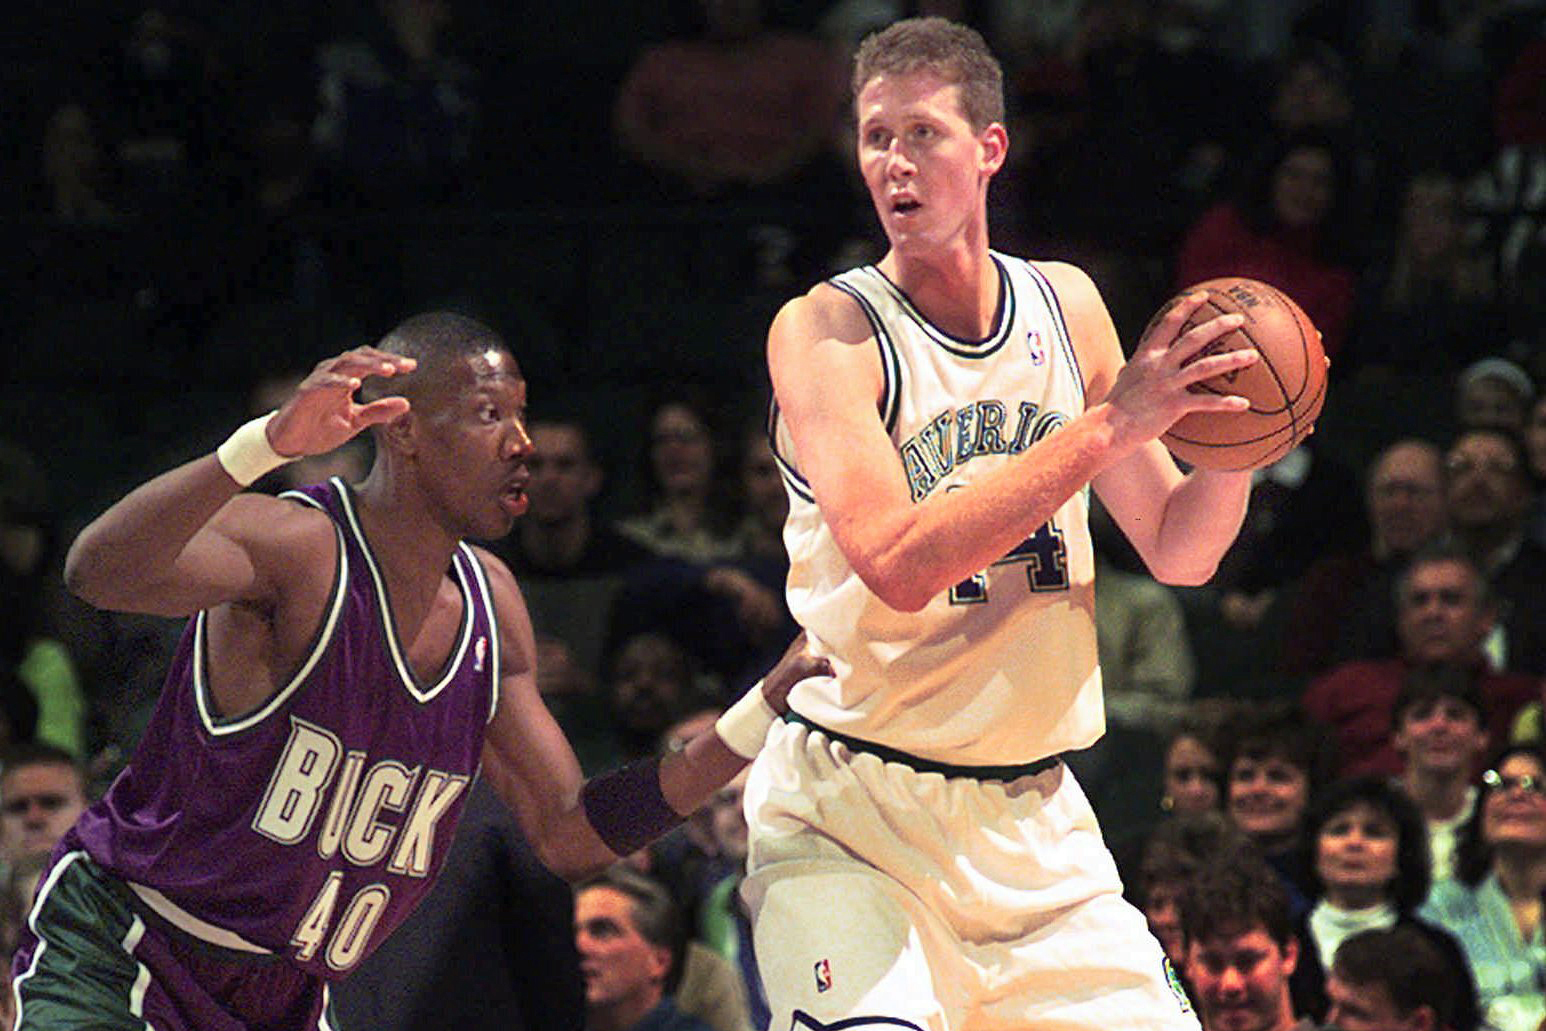 Report: Collision with van sent Shawn Bradley's bike into parked